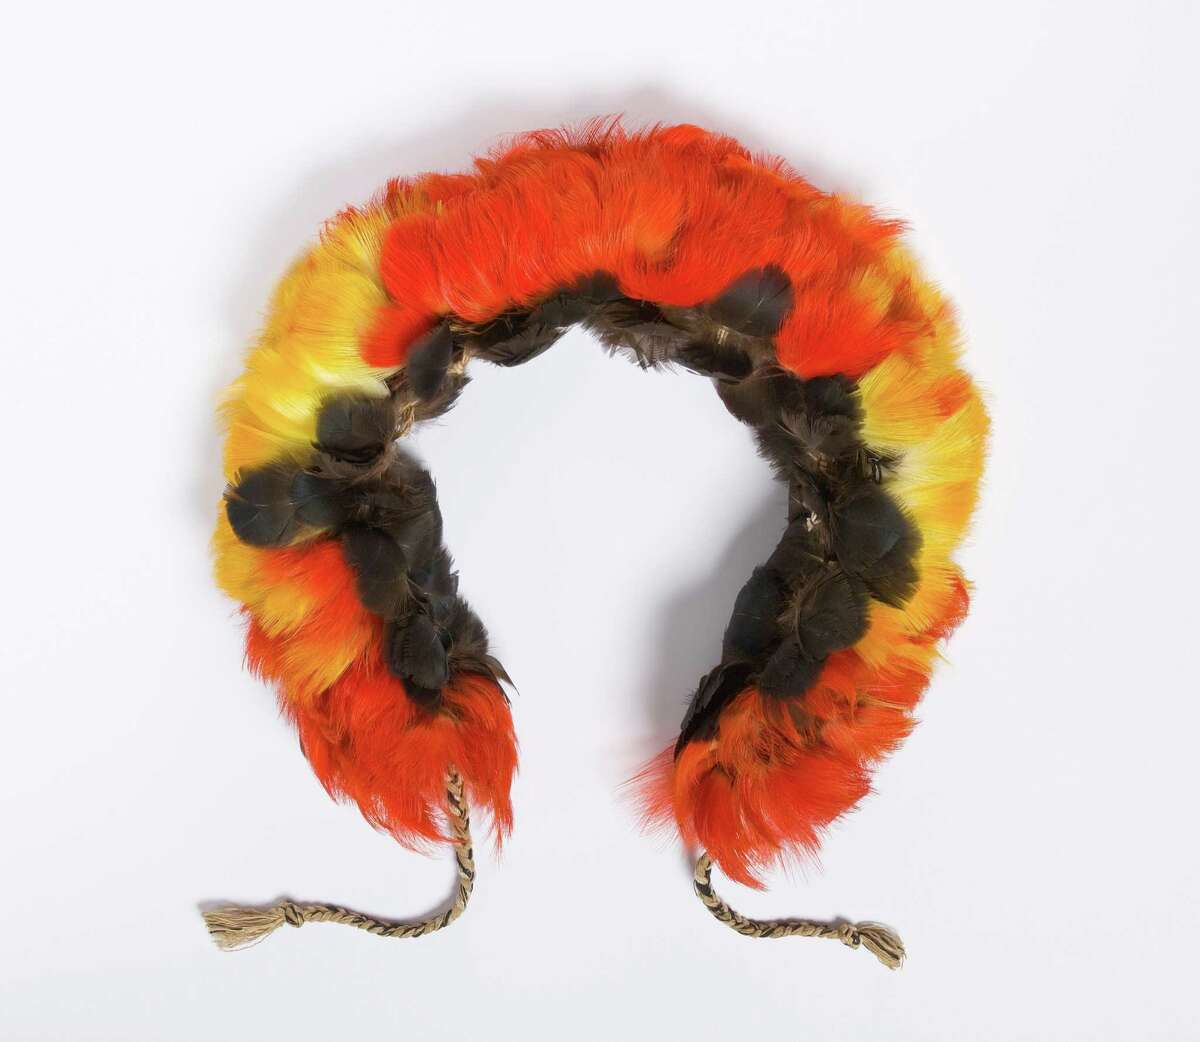 This feather headdress, ca.1920s âÄì 30s, is probably from South America, possibly Bolivia, and was a gift to the Bruce Museum from Georgiana Windsor. It was last on display in the museum's 1997 exhibition "The Splendor of Adornment."